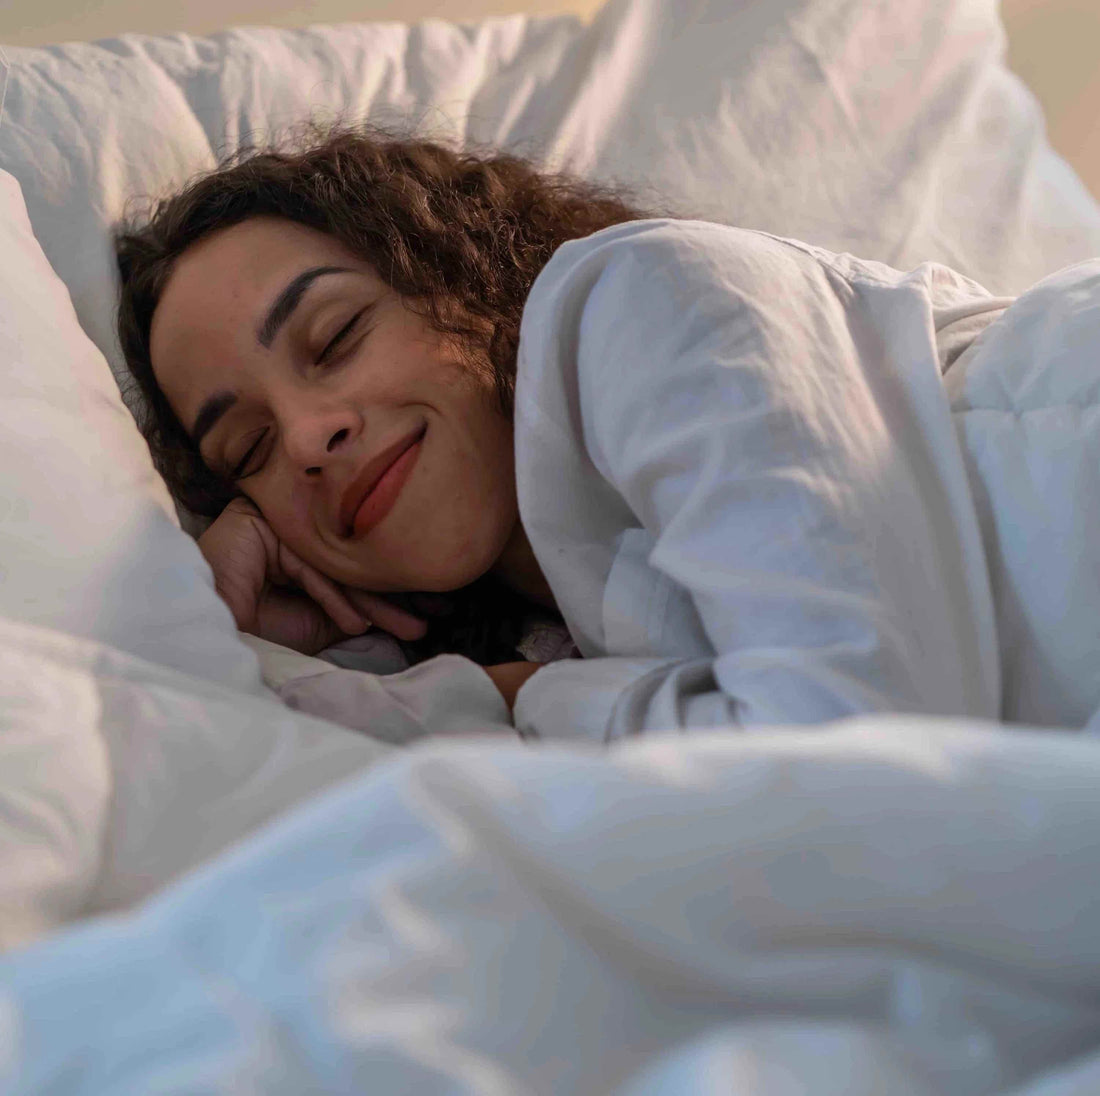 Young woman lying down on bed with comfortable smile on her face.